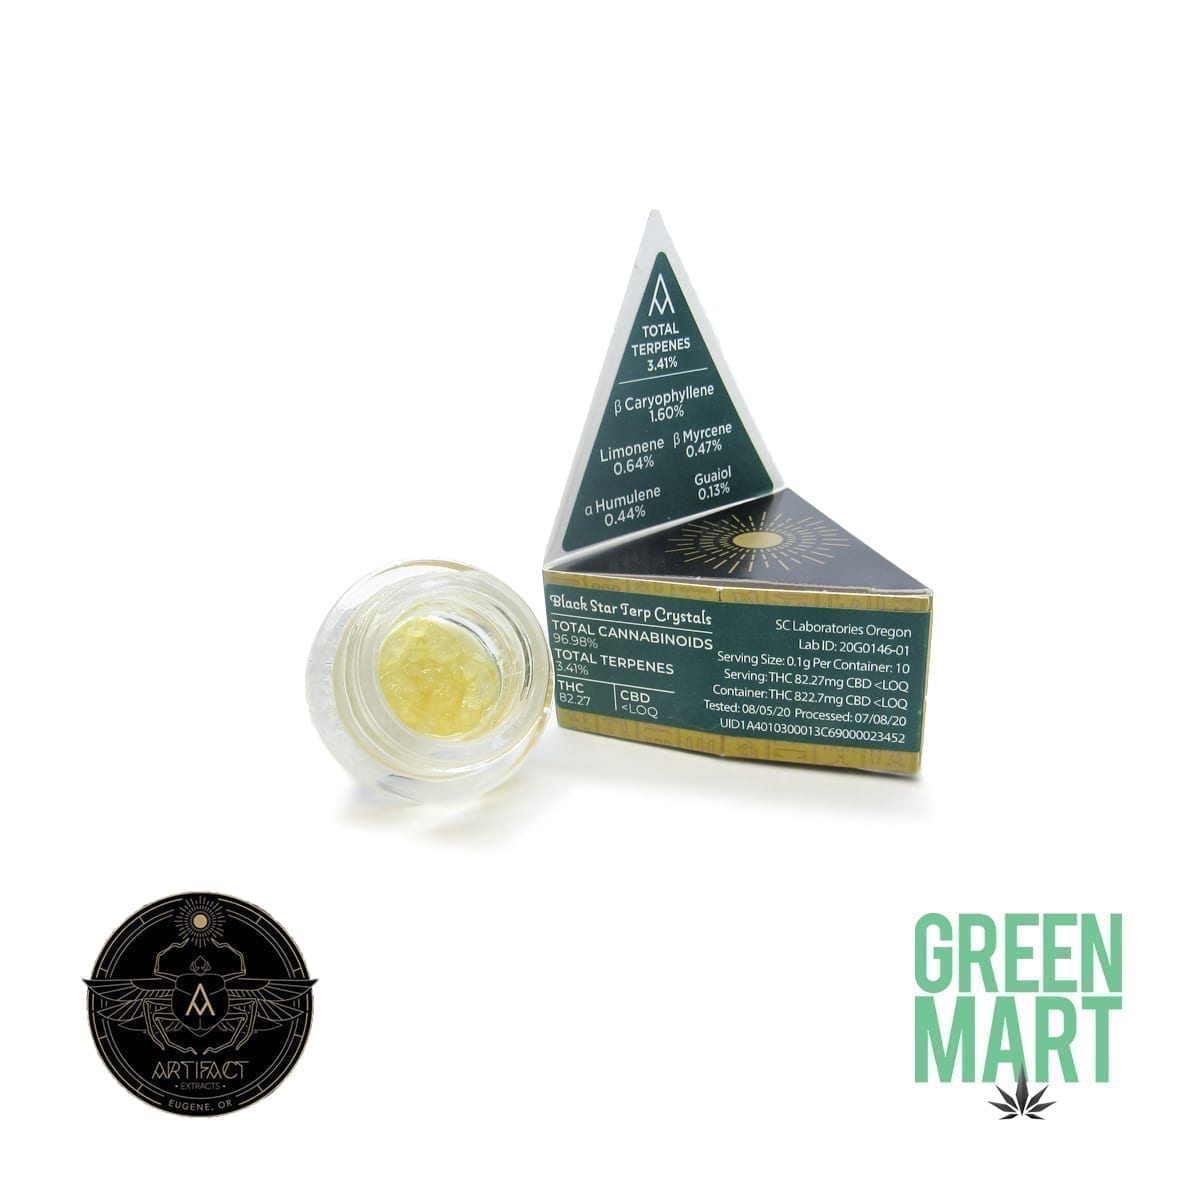 Artifact Extracts - Black Star Terp Crystals